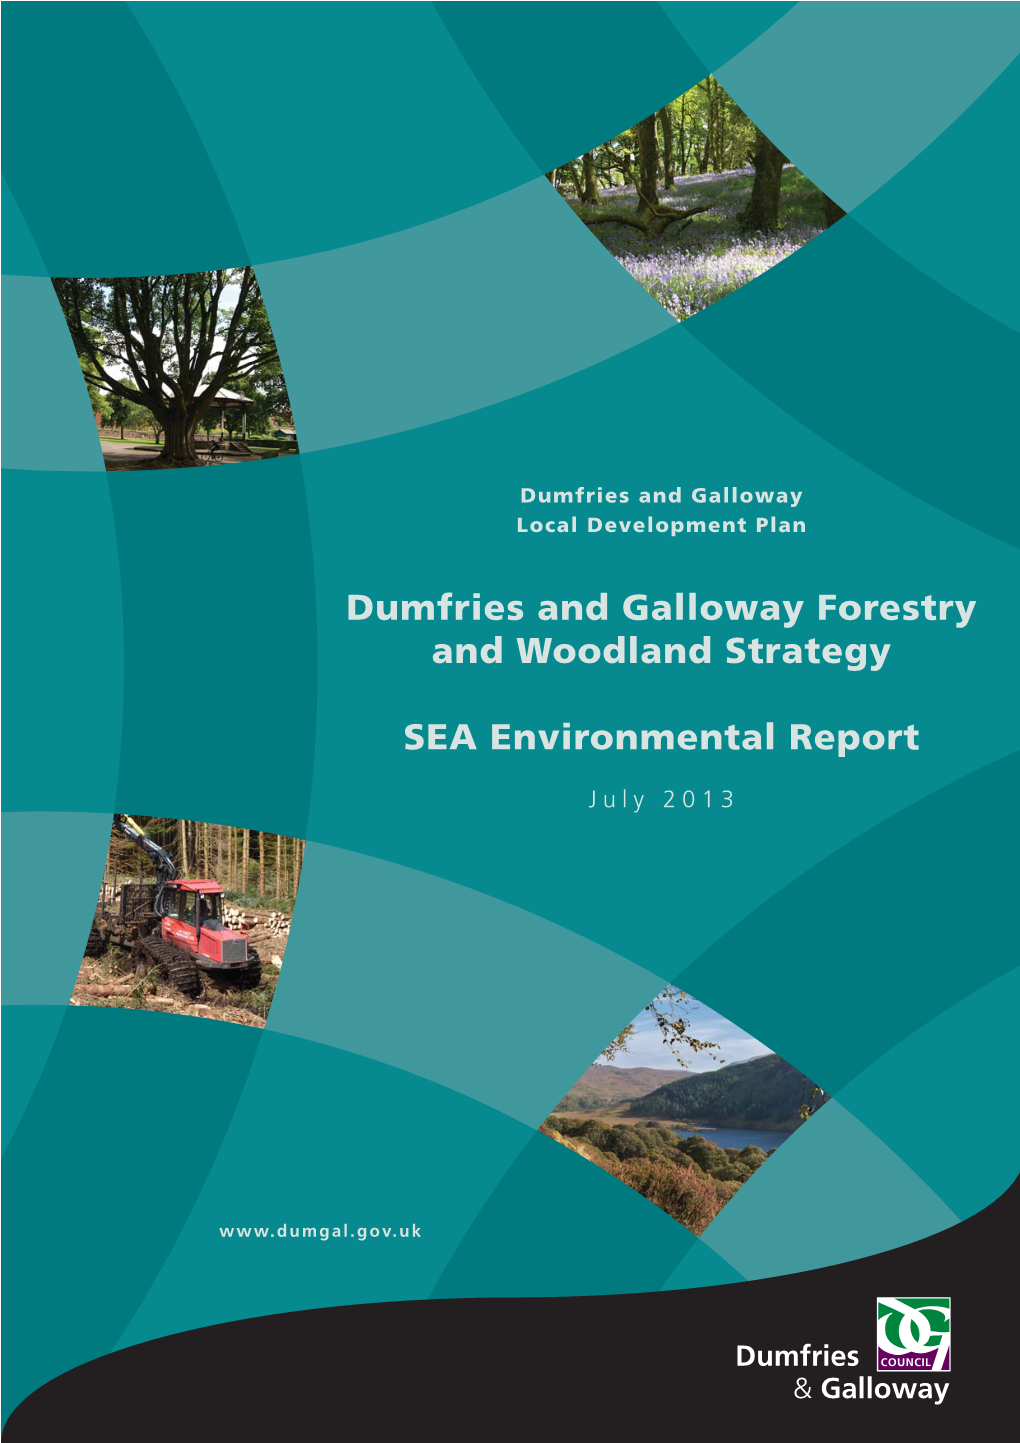 Dumfries and Galloway Forestry and Woodland Strategy Environmental